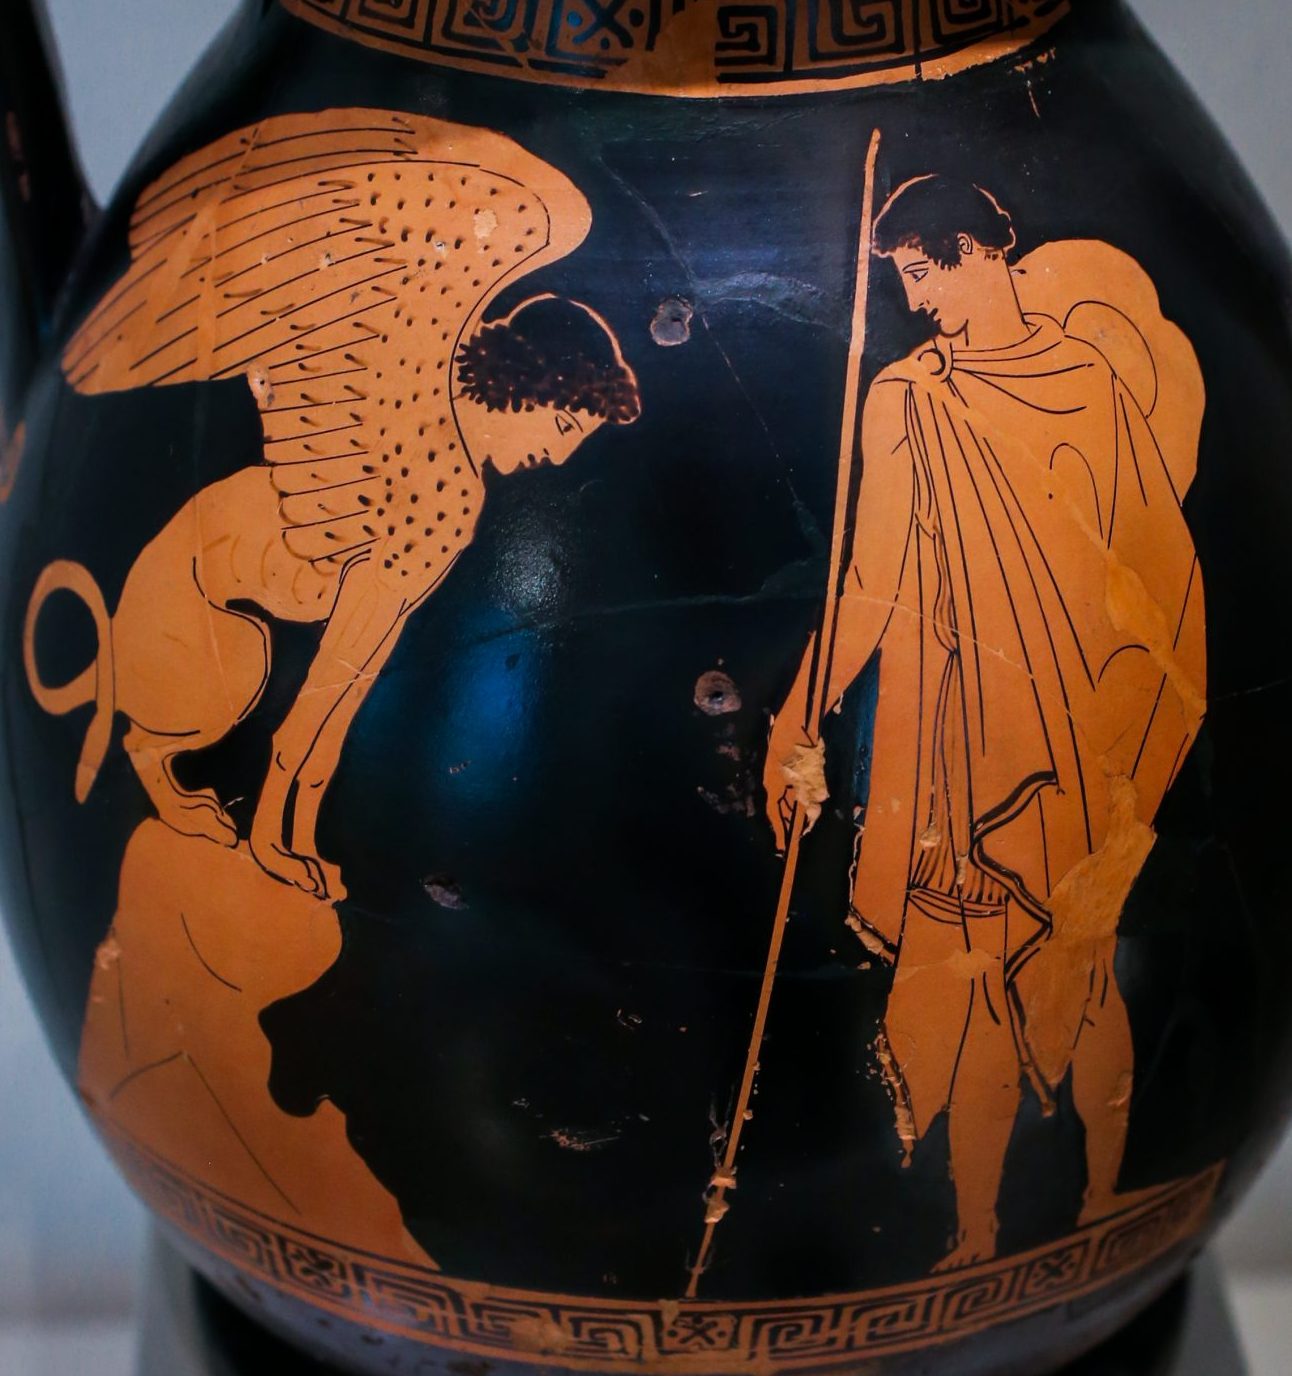 Oedipus, with a chlamys cape and a petasos hat around his neck, stands holding a long sceptre. The sphinx, a winged lion with a humanoid head, sits on a rock in front of Oedipus.